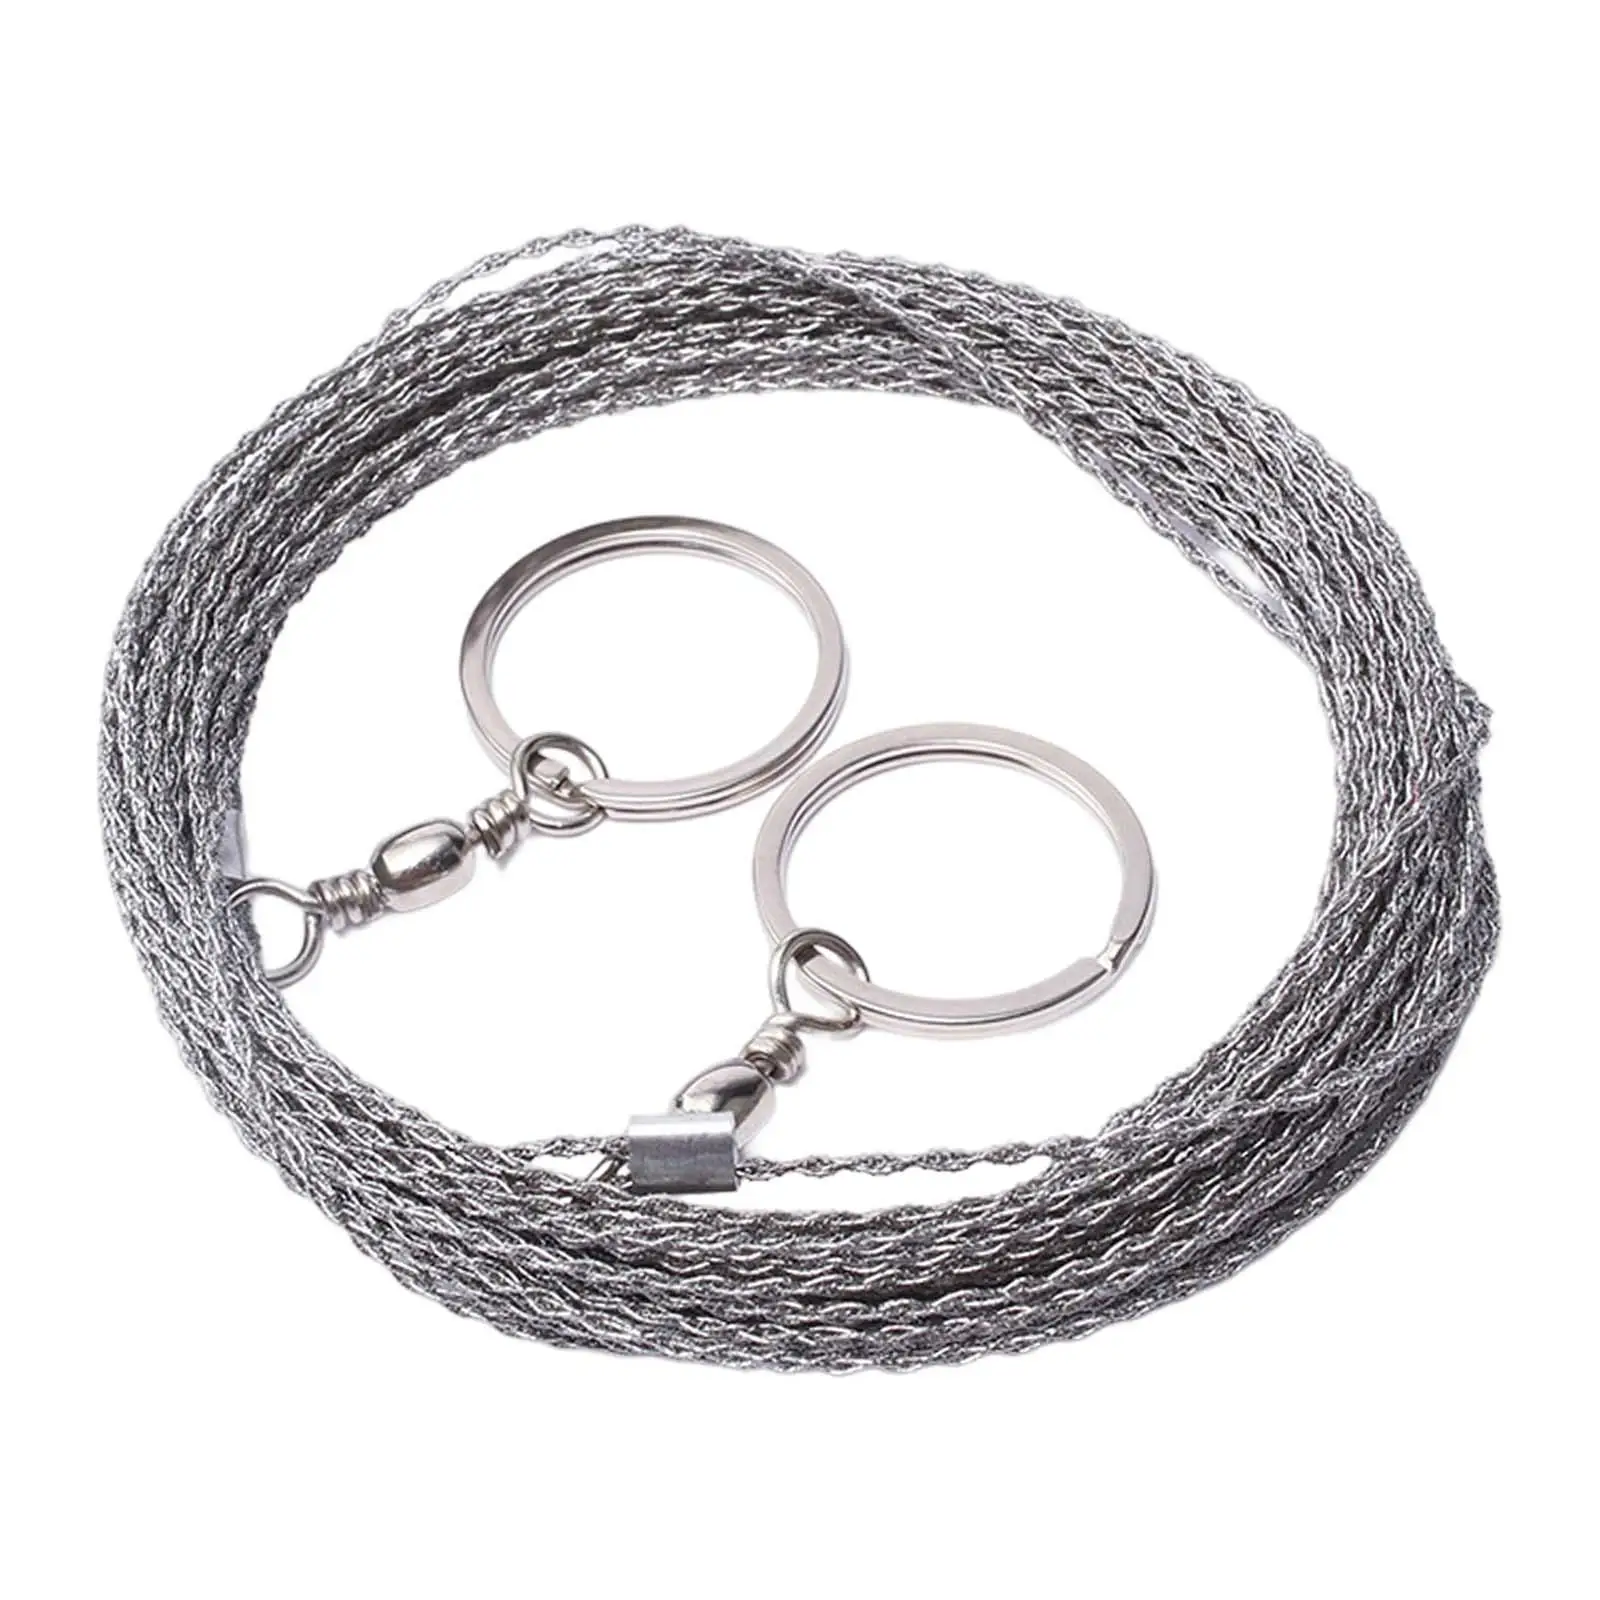 Wire Saw for Wood Survival Flexible Wood Heavy Duty Rope Saw Pocket Wire Saw for Travel Backpacking Emergency Camping